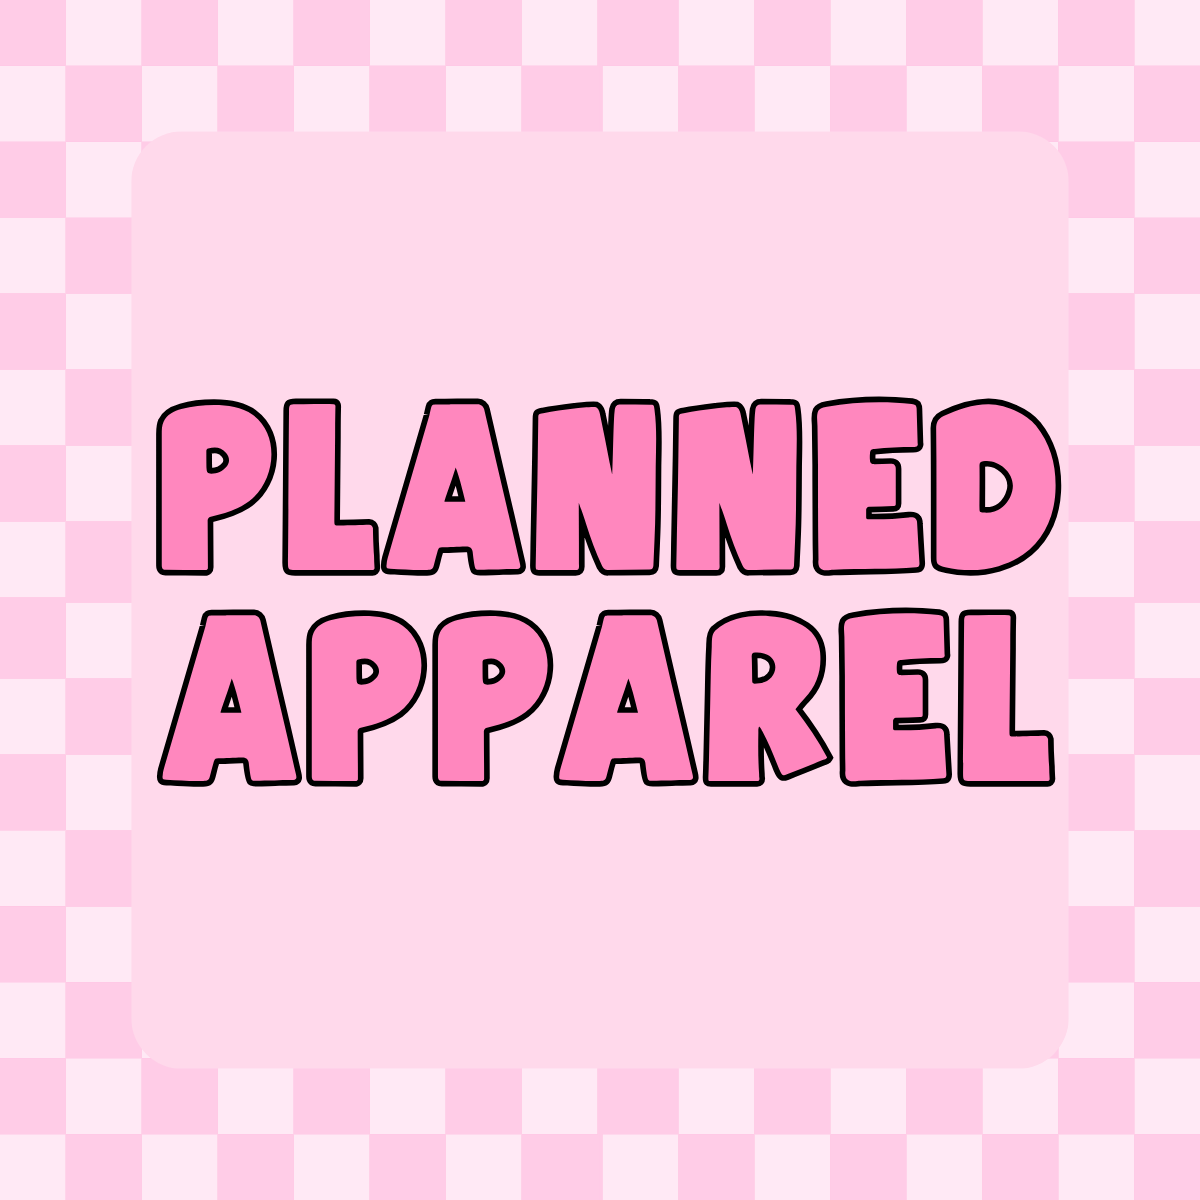 Planned Apparel